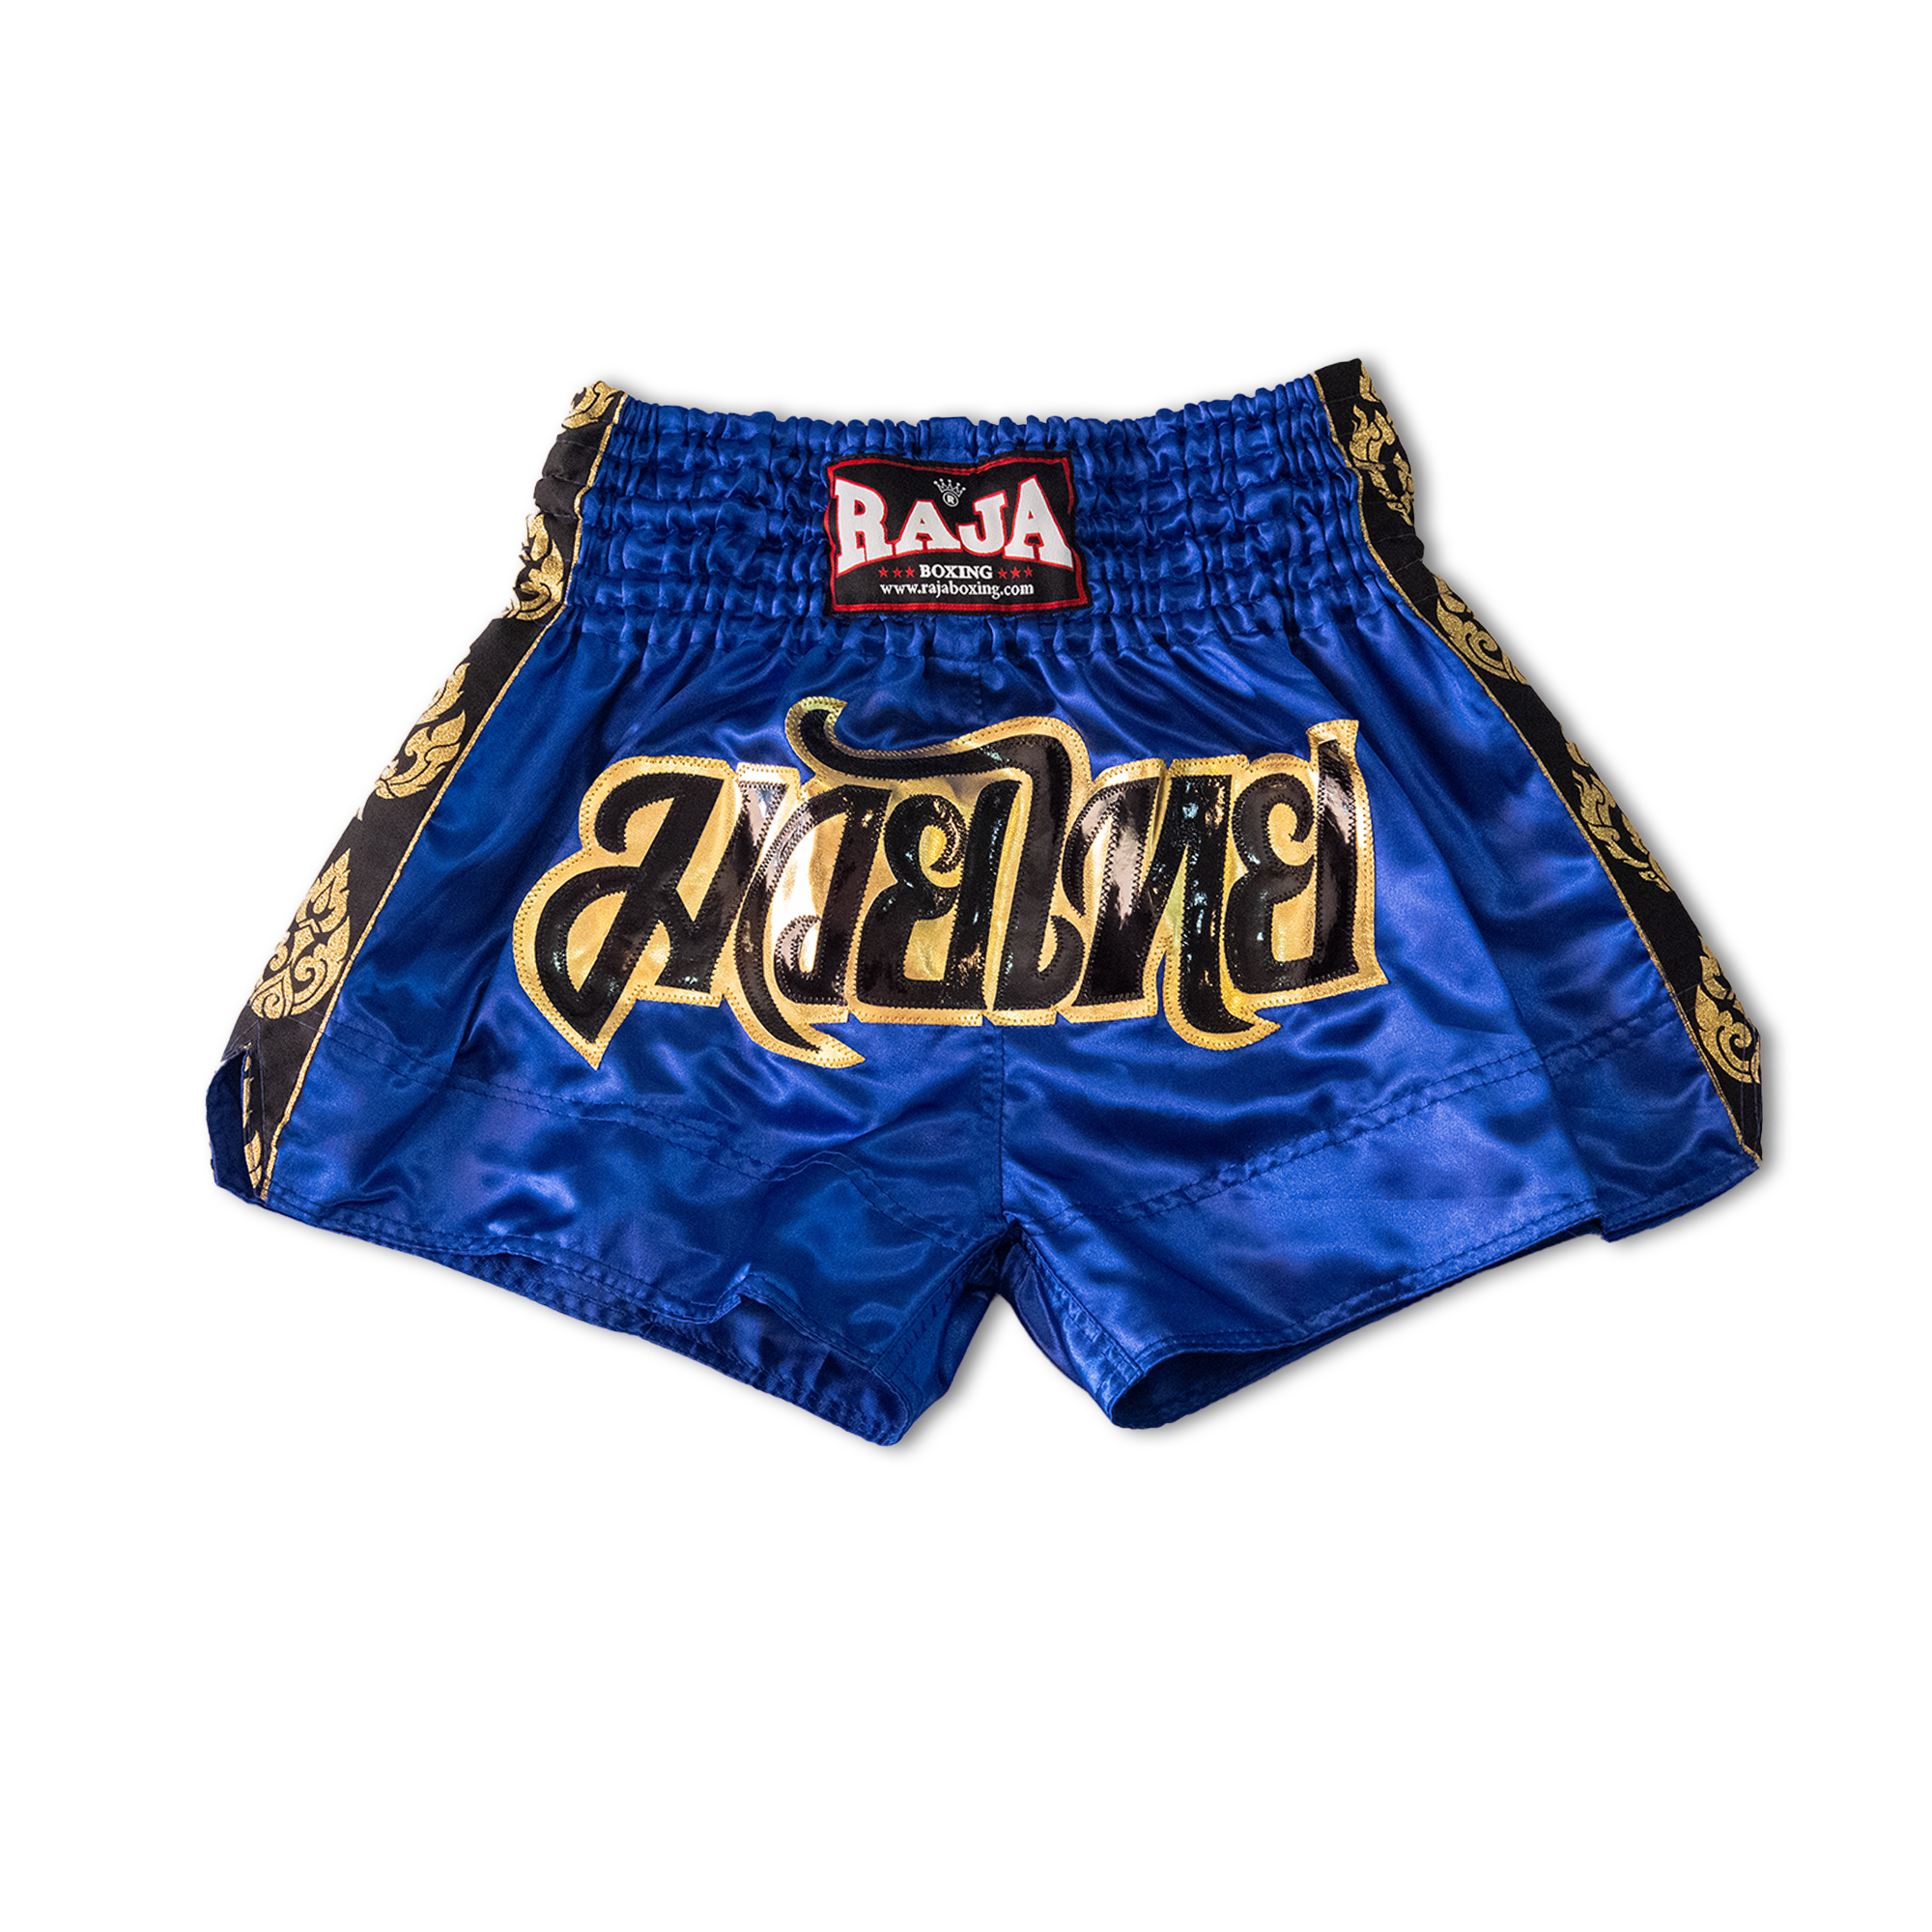 Home - RAJA BOXING (THAILAND) THE BEST ONE IN THE RING